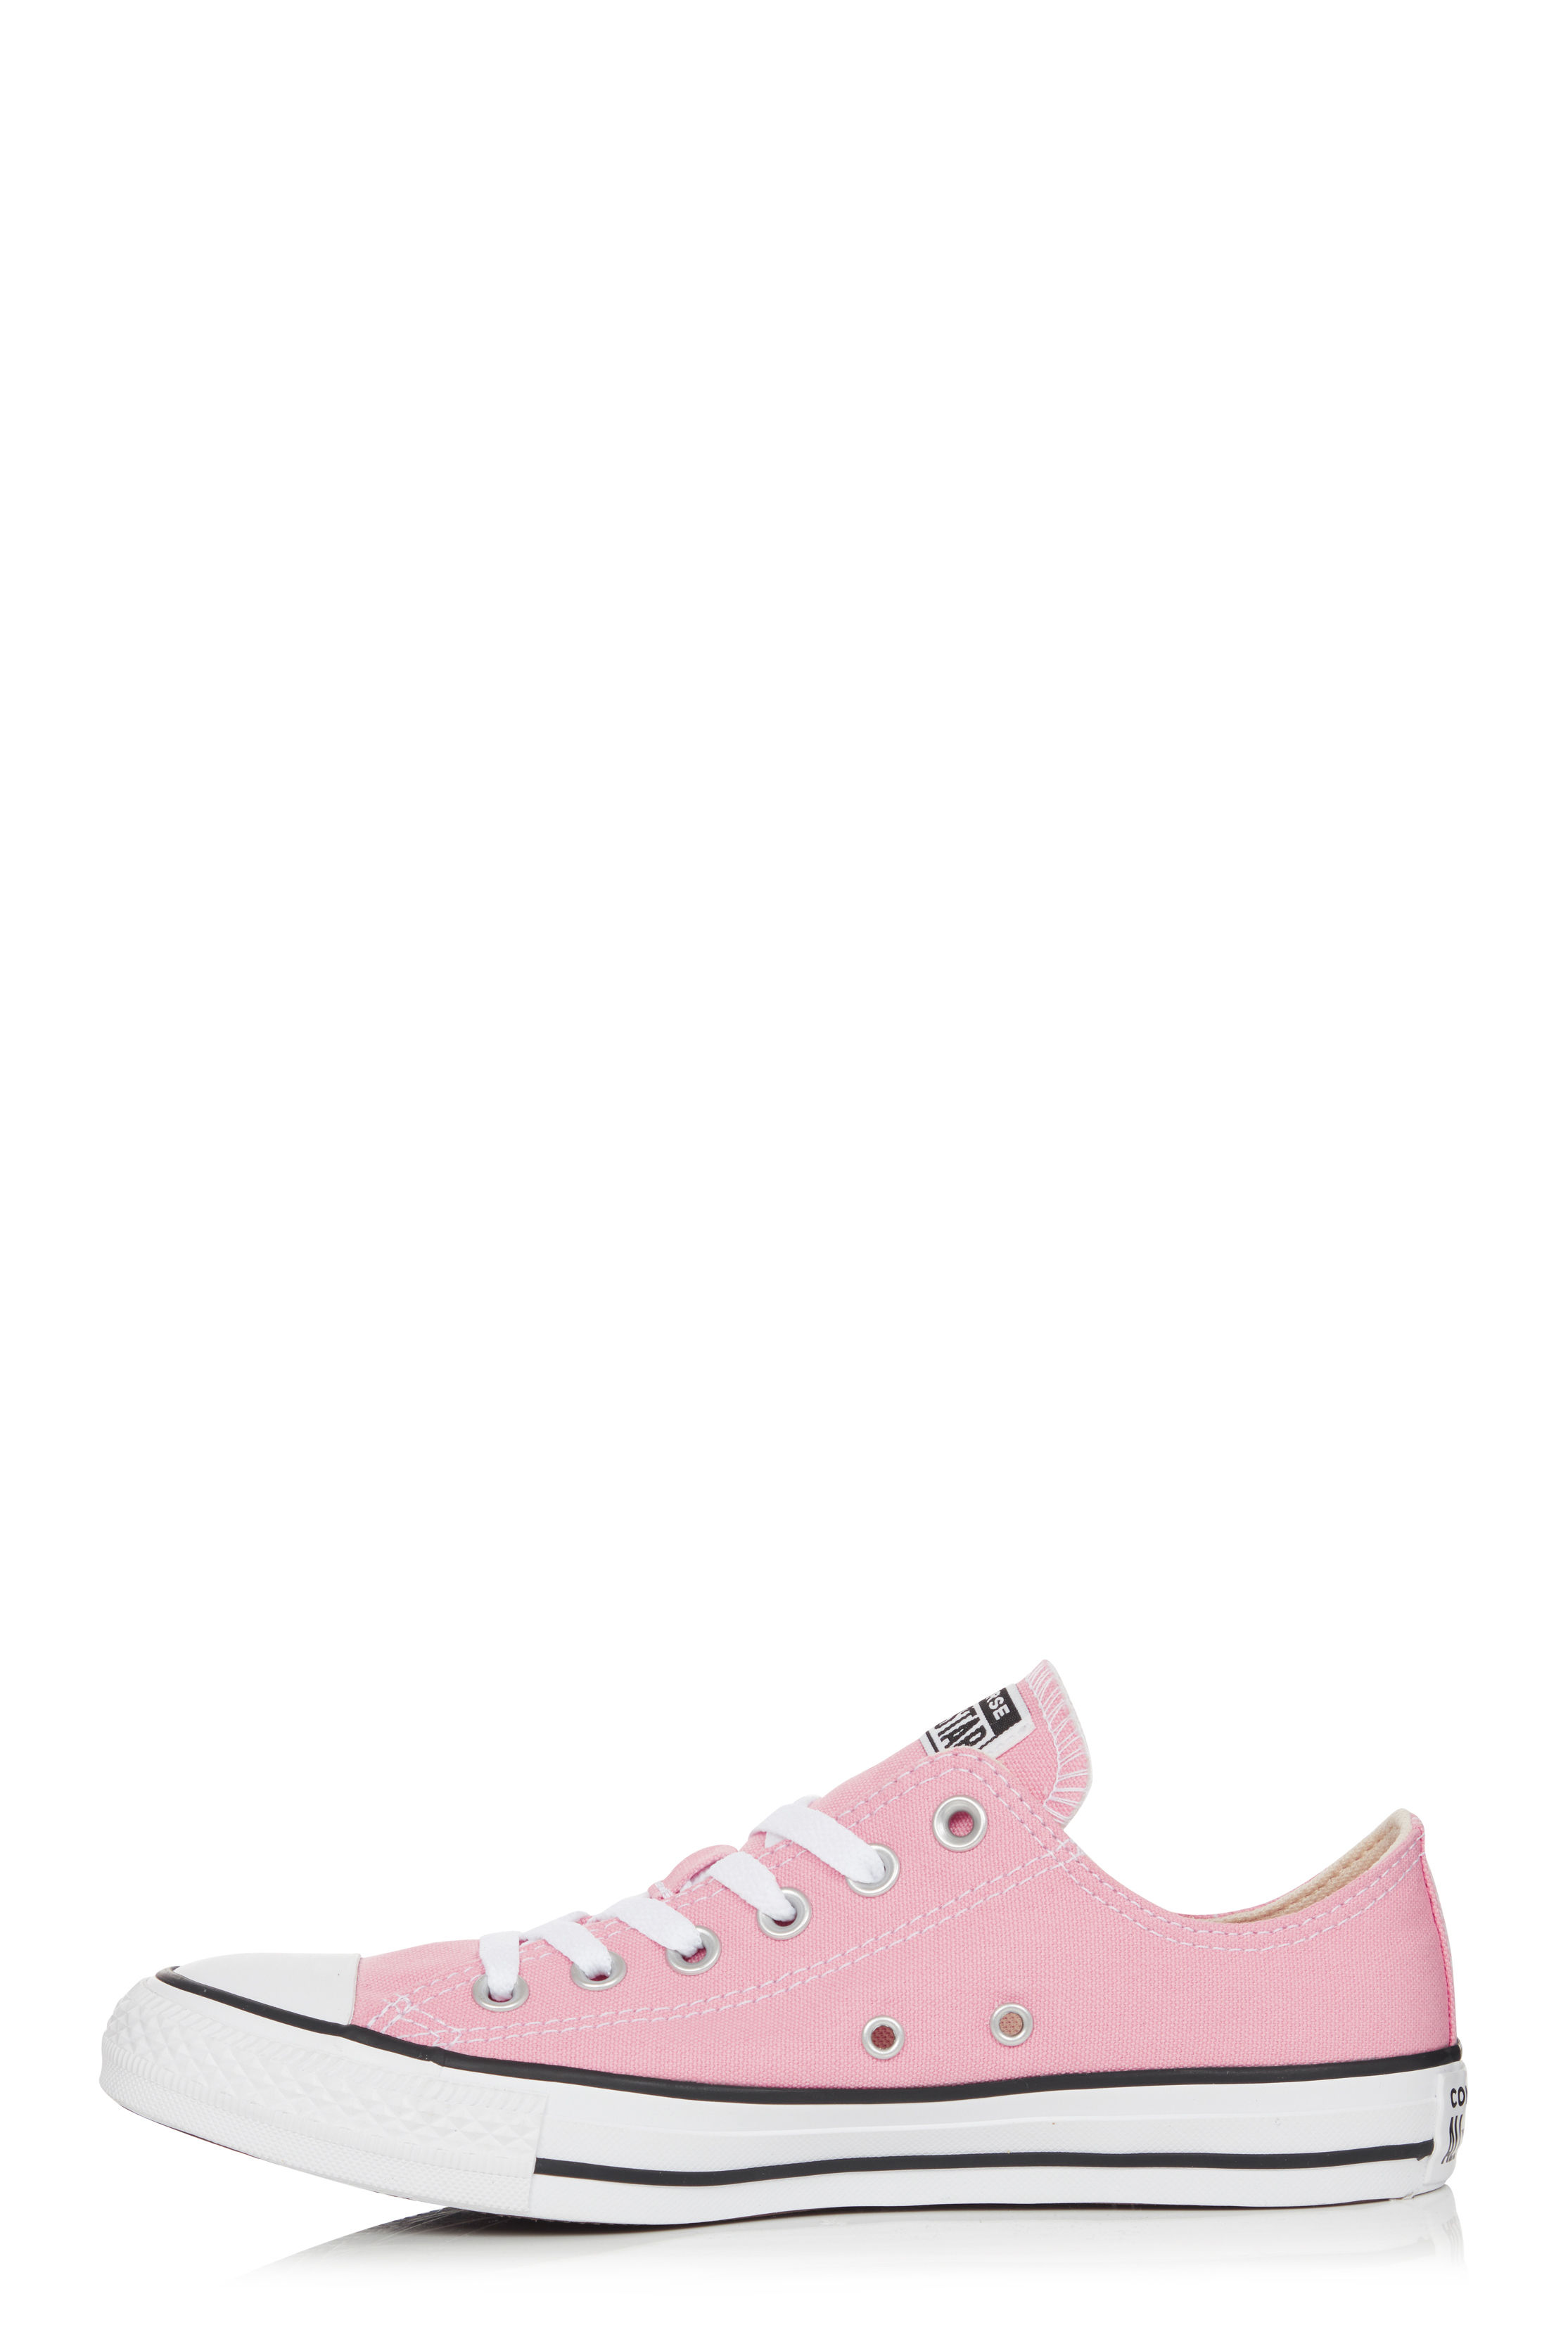 Converse All Star Pink Trainer Long Tall Sally